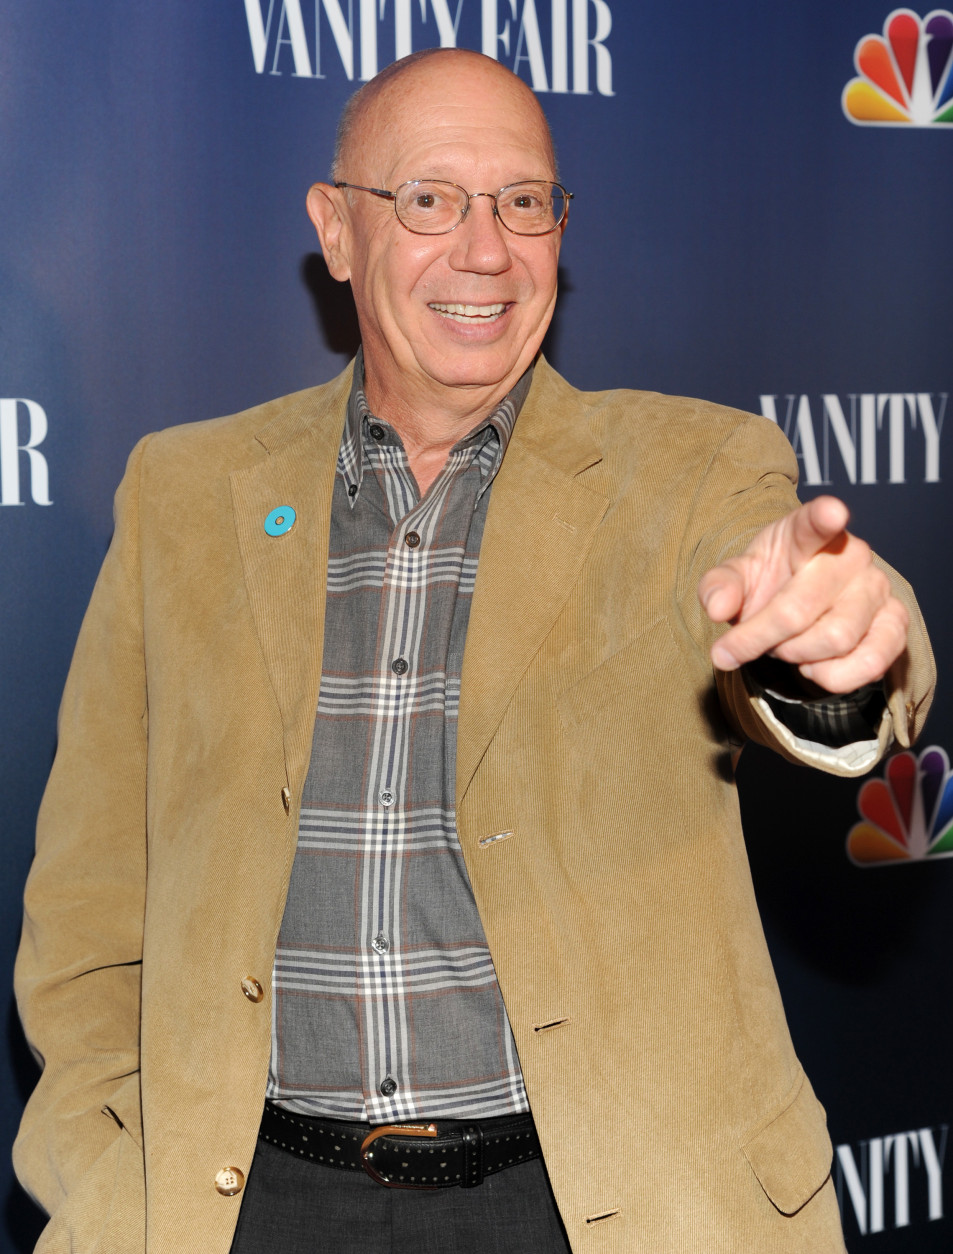 Actor Dann Florek from "Law &amp; Order"  attends the NBC 2013 Fall season launch party hosted by Vanity Fair at Le Bain on Monday, Sept. 16, 2013 in New York. (Photo by Evan Agostini/Invision/AP)